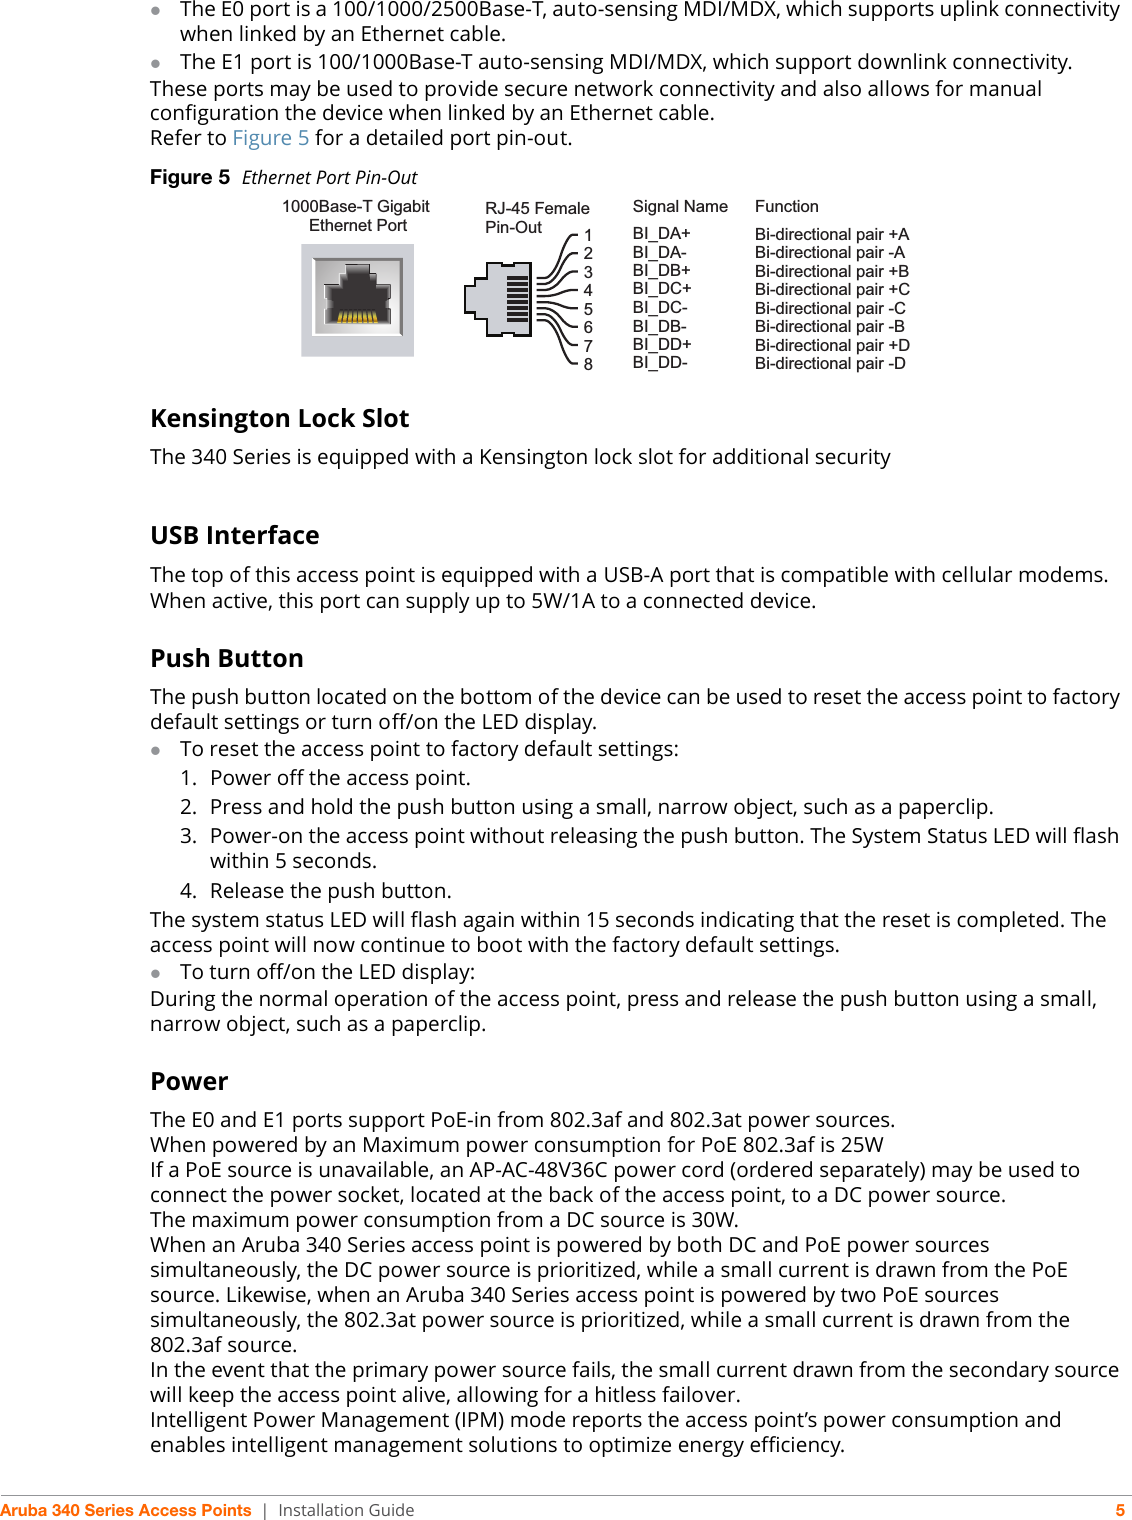 Aruba 340 Series Access Points | Installation Guide 5The E0 port is a 100/1000/2500Base-T, auto-sensing MDI/MDX, which supports uplink connectivity when linked by an Ethernet cable.The E1 port is 100/1000Base-T auto-sensing MDI/MDX, which support downlink connectivity.These ports may be used to provide secure network connectivity and also allows for manual configuration the device when linked by an Ethernet cable. Refer to Figure 5 for a detailed port pin-out. Figure 5  Ethernet Port Pin-OutKensington Lock SlotThe 340 Series is equipped with a Kensington lock slot for additional securityUSB InterfaceThe top of this access point is equipped with a USB-A port that is compatible with cellular modems. When active, this port can supply up to 5W/1A to a connected device.Push ButtonThe push button located on the bottom of the device can be used to reset the access point to factory default settings or turn off/on the LED display. To reset the access point to factory default settings:1. Power off the access point.2. Press and hold the push button using a small, narrow object, such as a paperclip.3. Power-on the access point without releasing the push button. The System Status LED will flash within 5 seconds.4. Release the push button.The system status LED will flash again within 15 seconds indicating that the reset is completed. The access point will now continue to boot with the factory default settings.To turn off/on the LED display:During the normal operation of the access point, press and release the push button using a small, narrow object, such as a paperclip. Power The E0 and E1 ports support PoE-in from 802.3af and 802.3at power sources. When powered by an Maximum power consumption for PoE 802.3af is 25WIf a PoE source is unavailable, an AP-AC-48V36C power cord (ordered separately) may be used to connect the power socket, located at the back of the access point, to a DC power source. The maximum power consumption from a DC source is 30W. When an Aruba 340 Series access point is powered by both DC and PoE power sources simultaneously, the DC power source is prioritized, while a small current is drawn from the PoE source. Likewise, when an Aruba 340 Series access point is powered by two PoE sources simultaneously, the 802.3at power source is prioritized, while a small current is drawn from the 802.3af source.In the event that the primary power source fails, the small current drawn from the secondary source will keep the access point alive, allowing for a hitless failover.Intelligent Power Management (IPM) mode reports the access point’s power consumption and enables intelligent management solutions to optimize energy efficiency.1000Base-T Gigabit Ethernet PortRJ-45 FemalePin-OutSignal Name12345678BI_DC+BI_DC-BI_DD+BI_DD-BI_DA+BI_DA-BI_DB+BI_DB-FunctionBi-directional pair +CBi-directional pair -CBi-directional pair +DBi-directional pair -DBi-directional pair +ABi-directional pair -ABi-directional pair +BBi-directional pair -B     